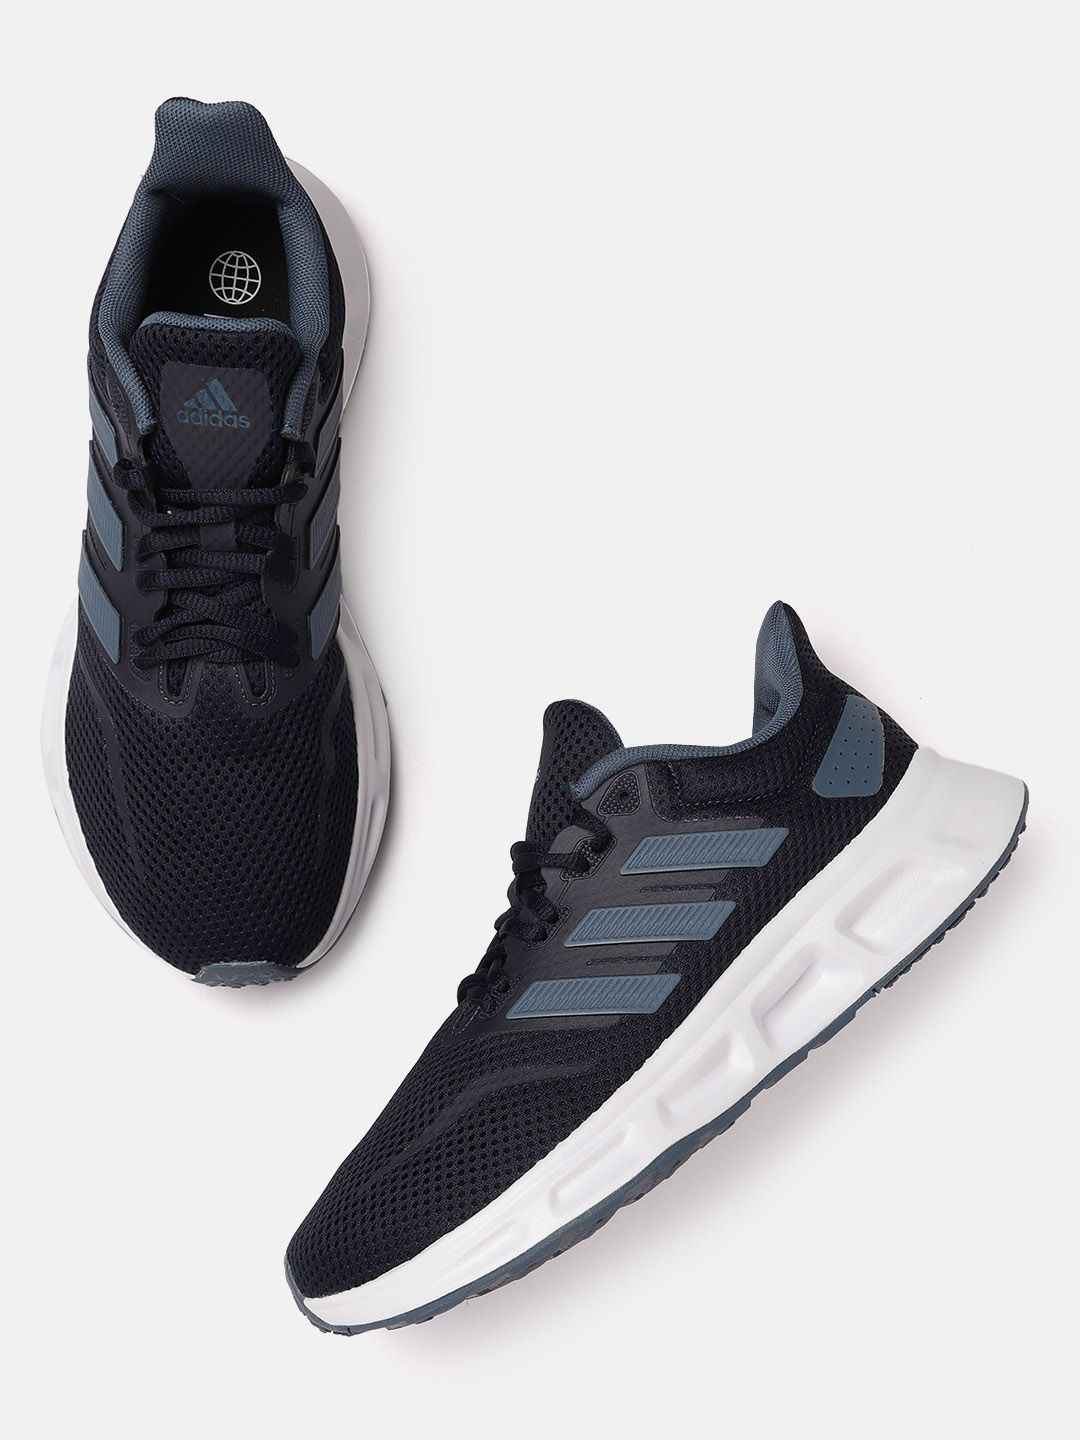 ADIDAS Unisex Blue Woven Design Show The Way 2.0 Running Shoes Price in India